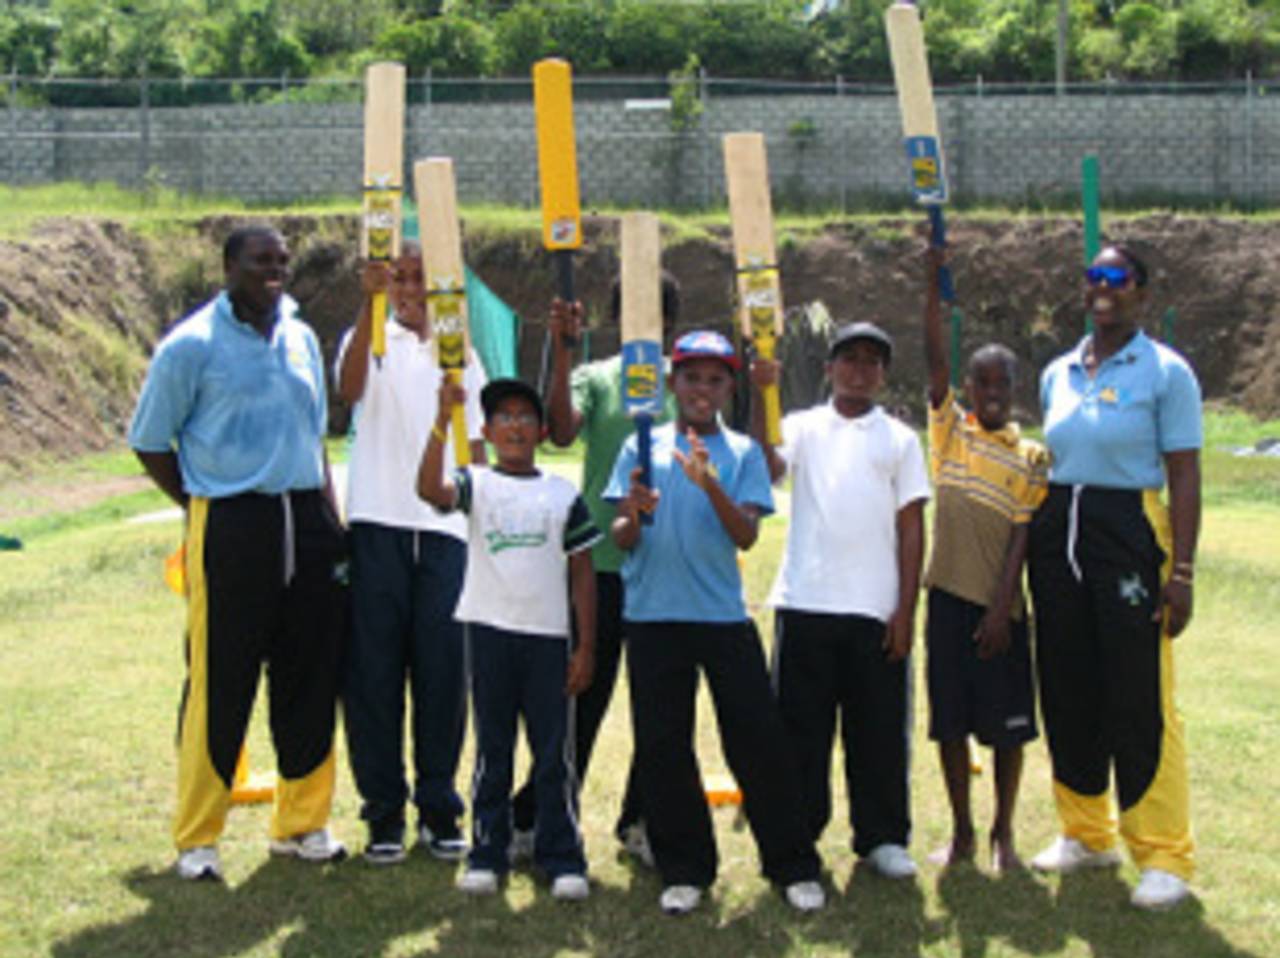 Sport for Life! has already launched a Caribbean initiative&nbsp;&nbsp;&bull;&nbsp;&nbsp;Sport for Life!